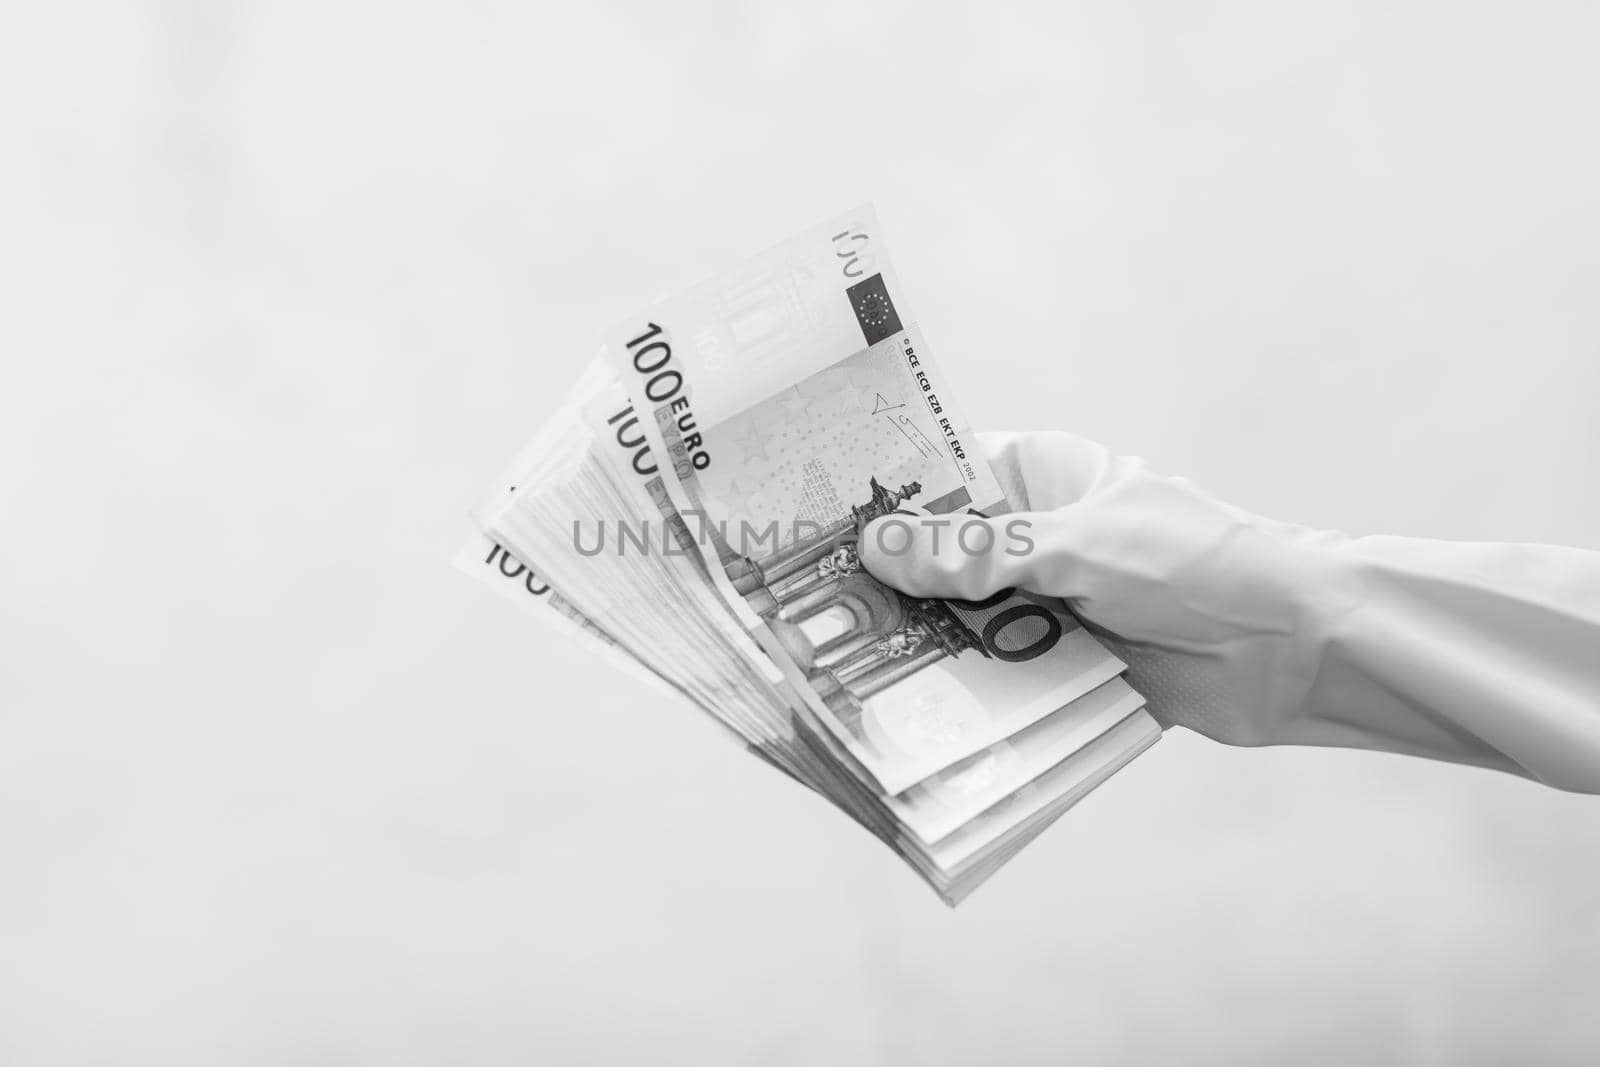 Hand with gloves receiving, giving or holding 100 EURO banknote, isolated on blurred background